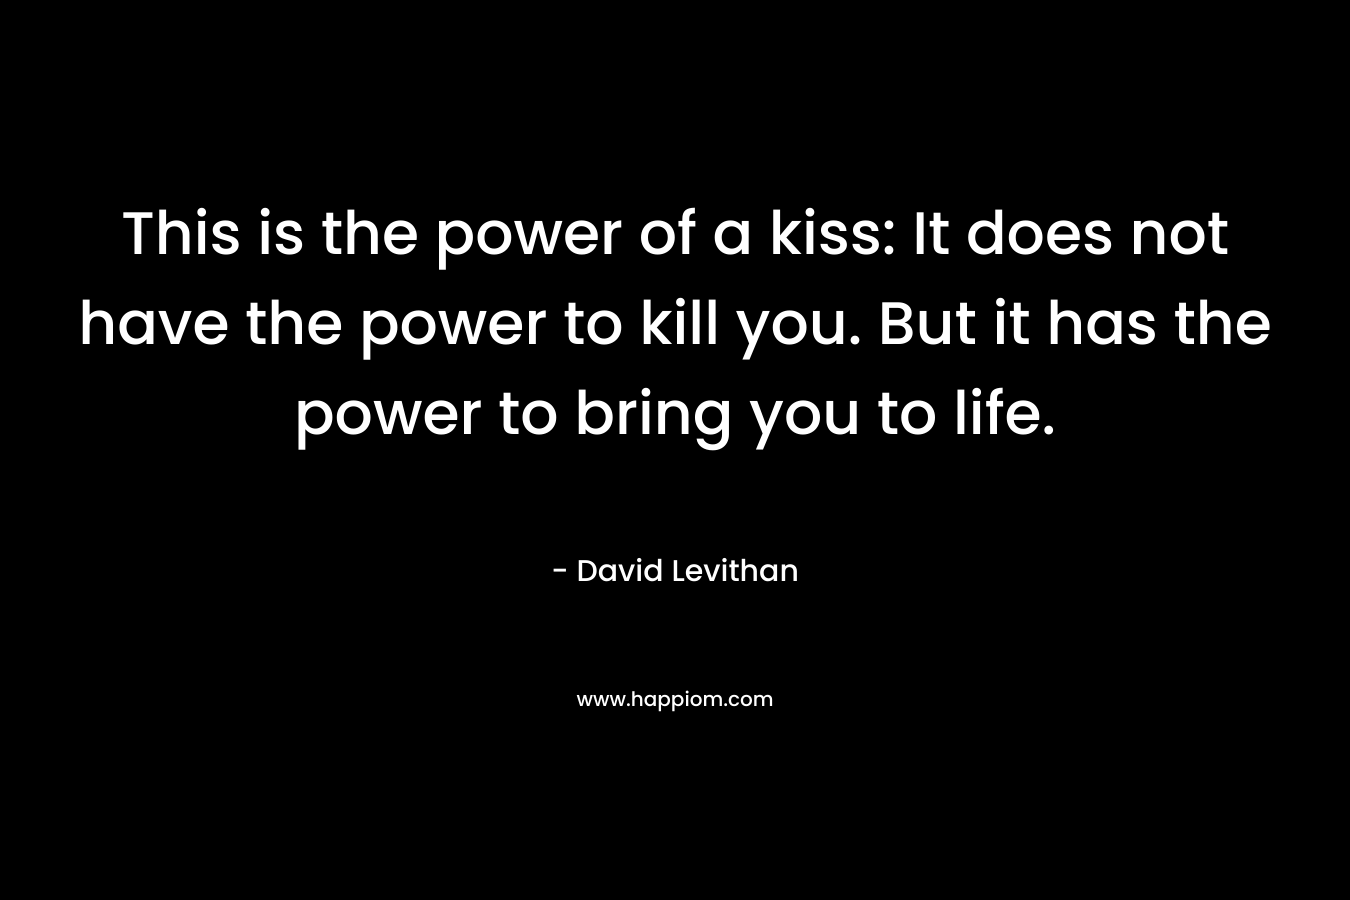 This is the power of a kiss: It does not have the power to kill you. But it has the power to bring you to life.